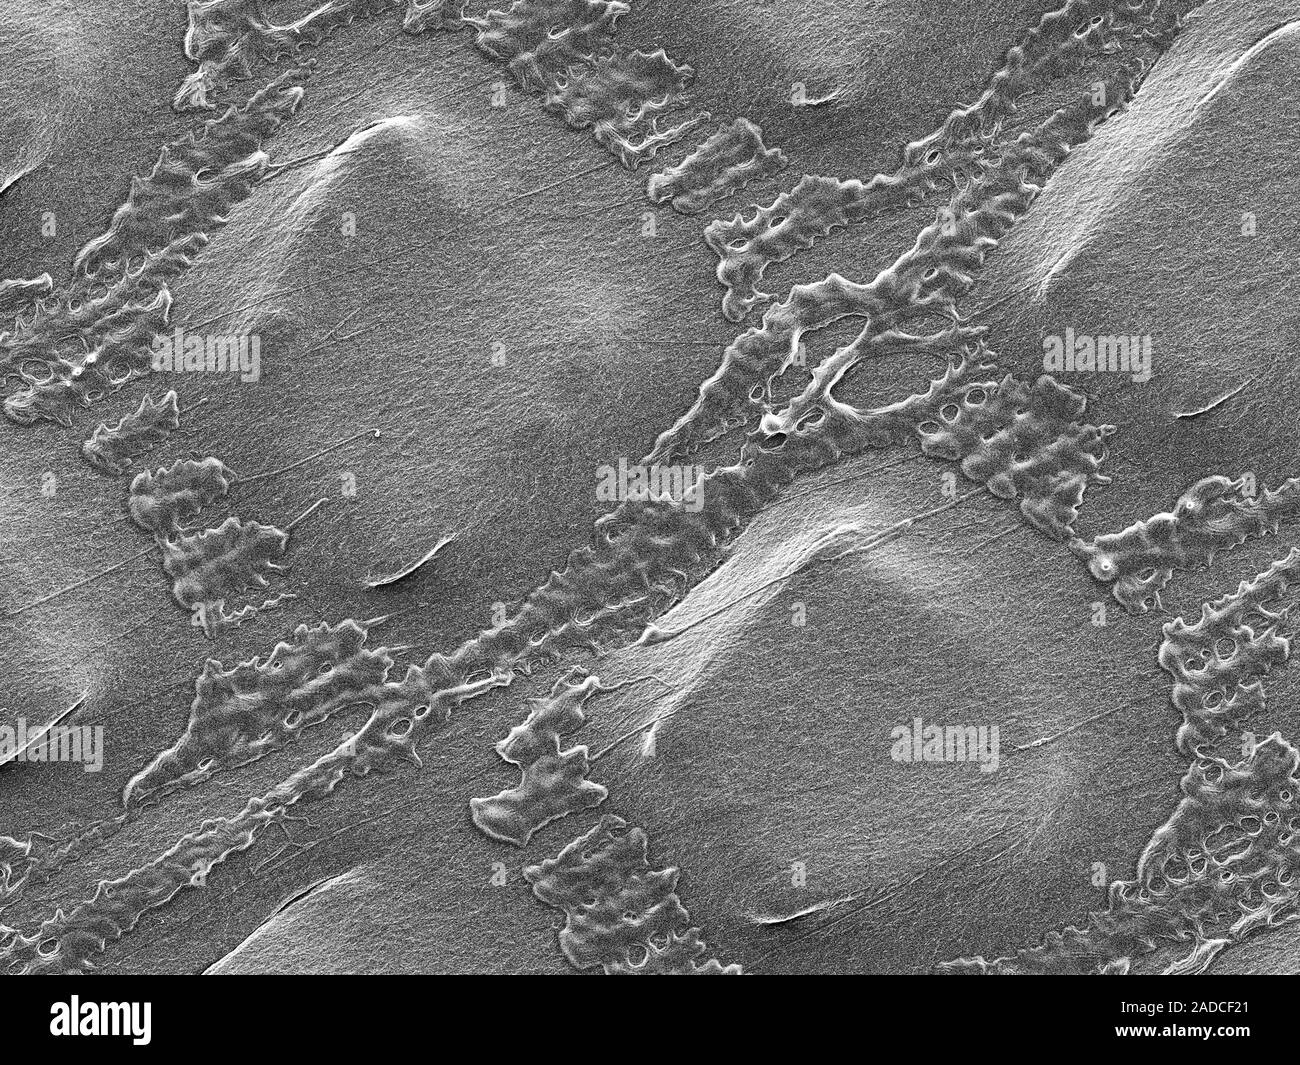 https://c8.alamy.com/comp/2ADCF21/scanning-electron-micrograph-sem-of-plastic-wrap-glad-pressn-seal-plastic-wrap-is-a-thin-plastic-film-less-than-001mm-in-thickness-that-typica-2ADCF21.jpg